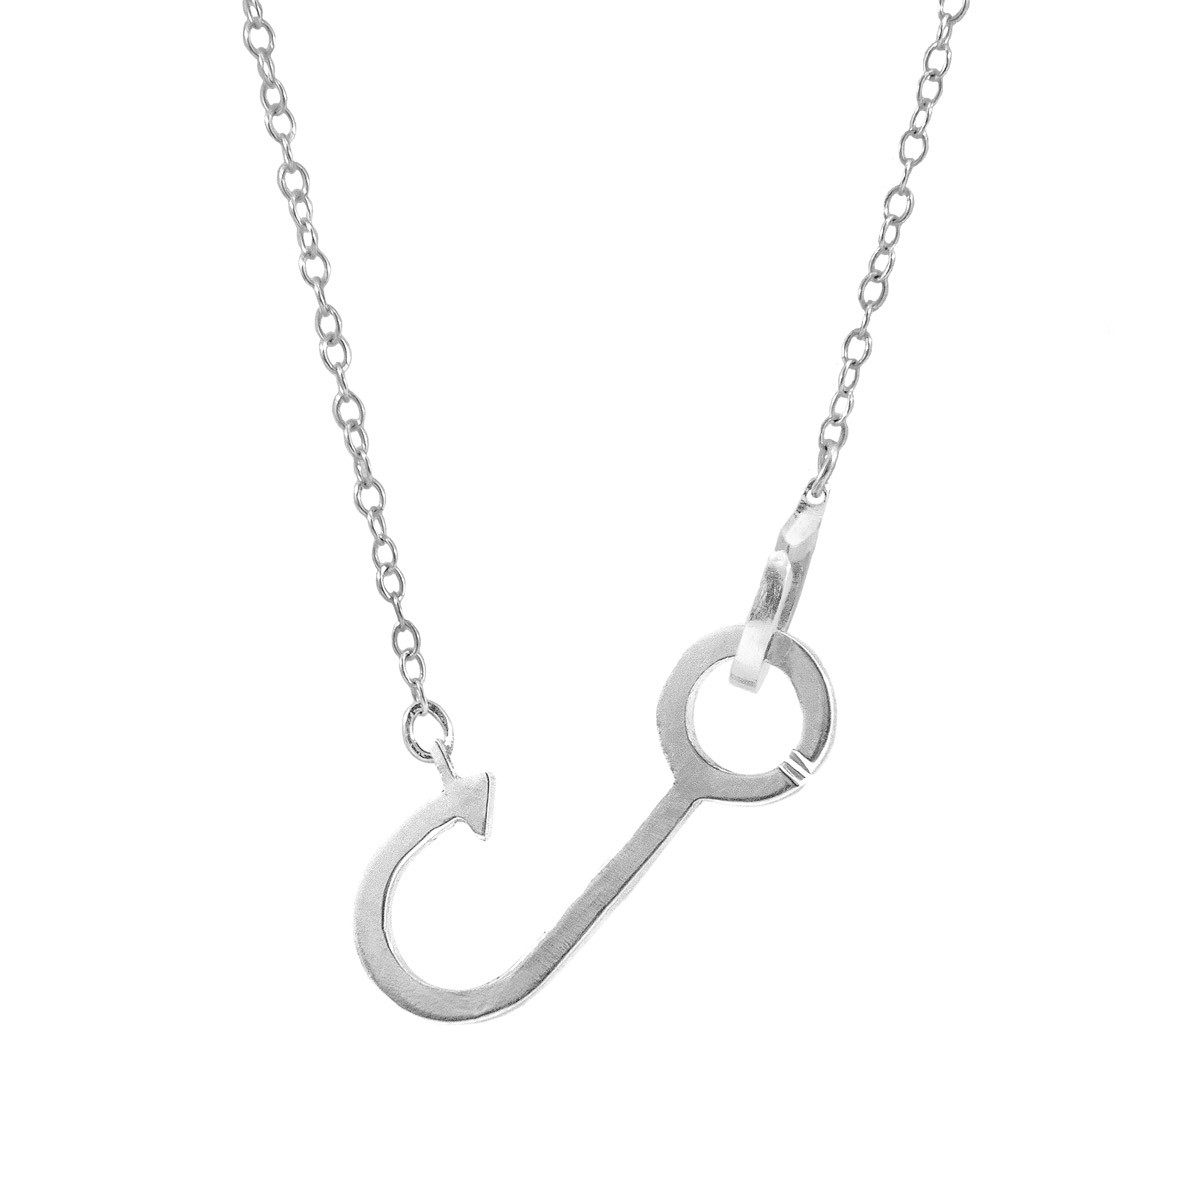 Anchor & Crew Fish Hook Link Paradise Silver Necklace Pendant